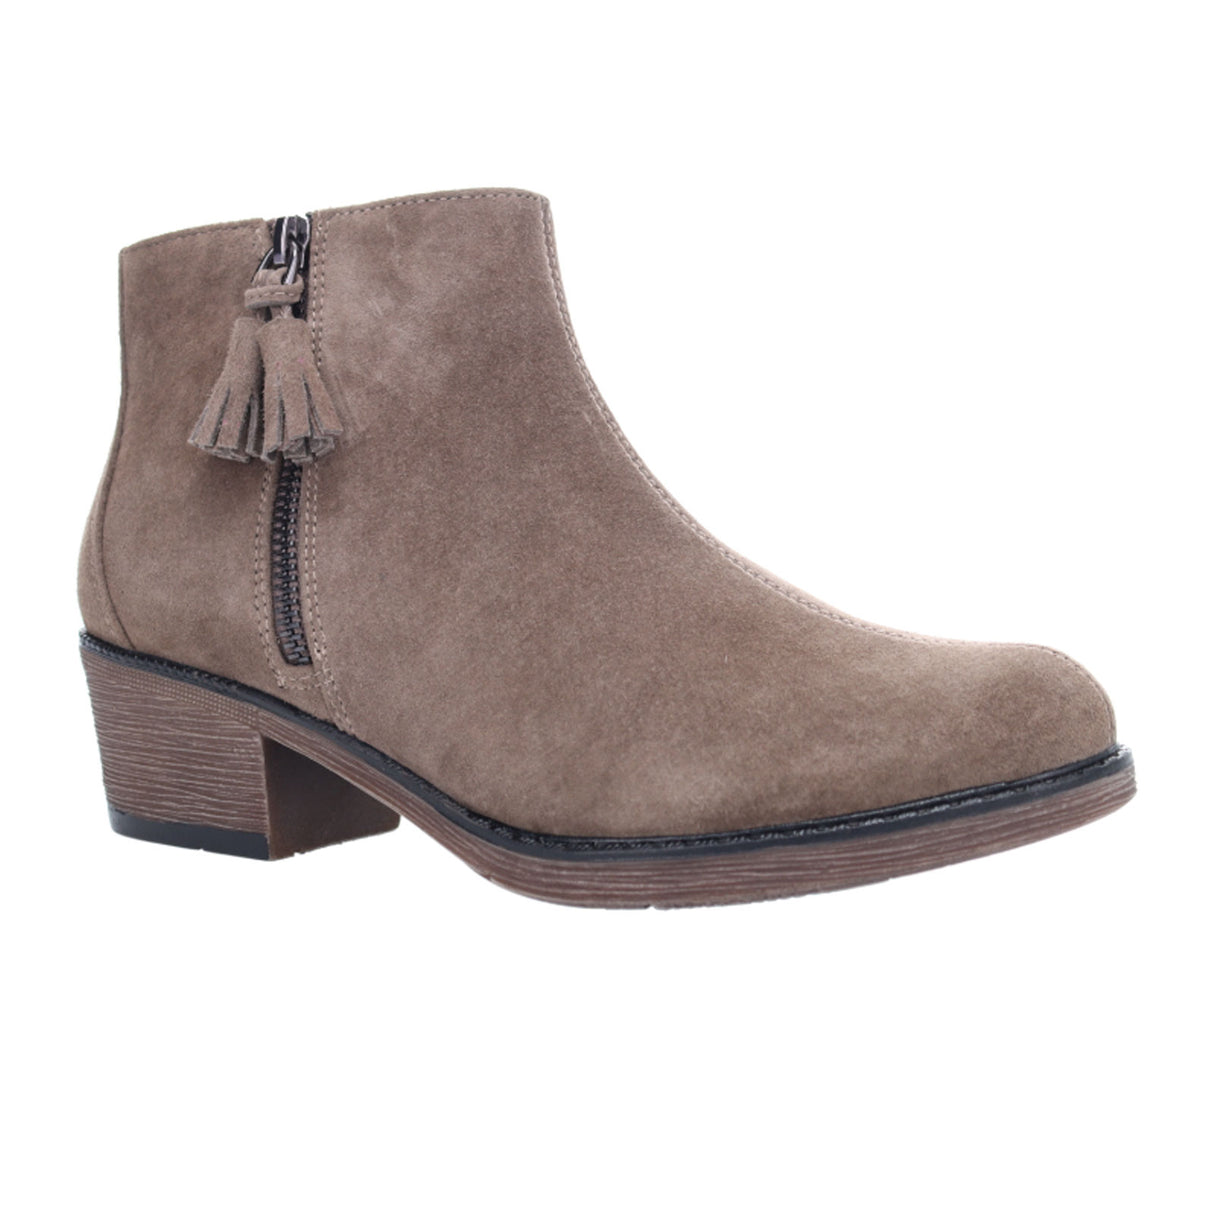 Propet Rebel Ankle Boot (Women) - Smoked Taupe Suede Boots - Fashion - Ankle Boot - The Heel Shoe Fitters